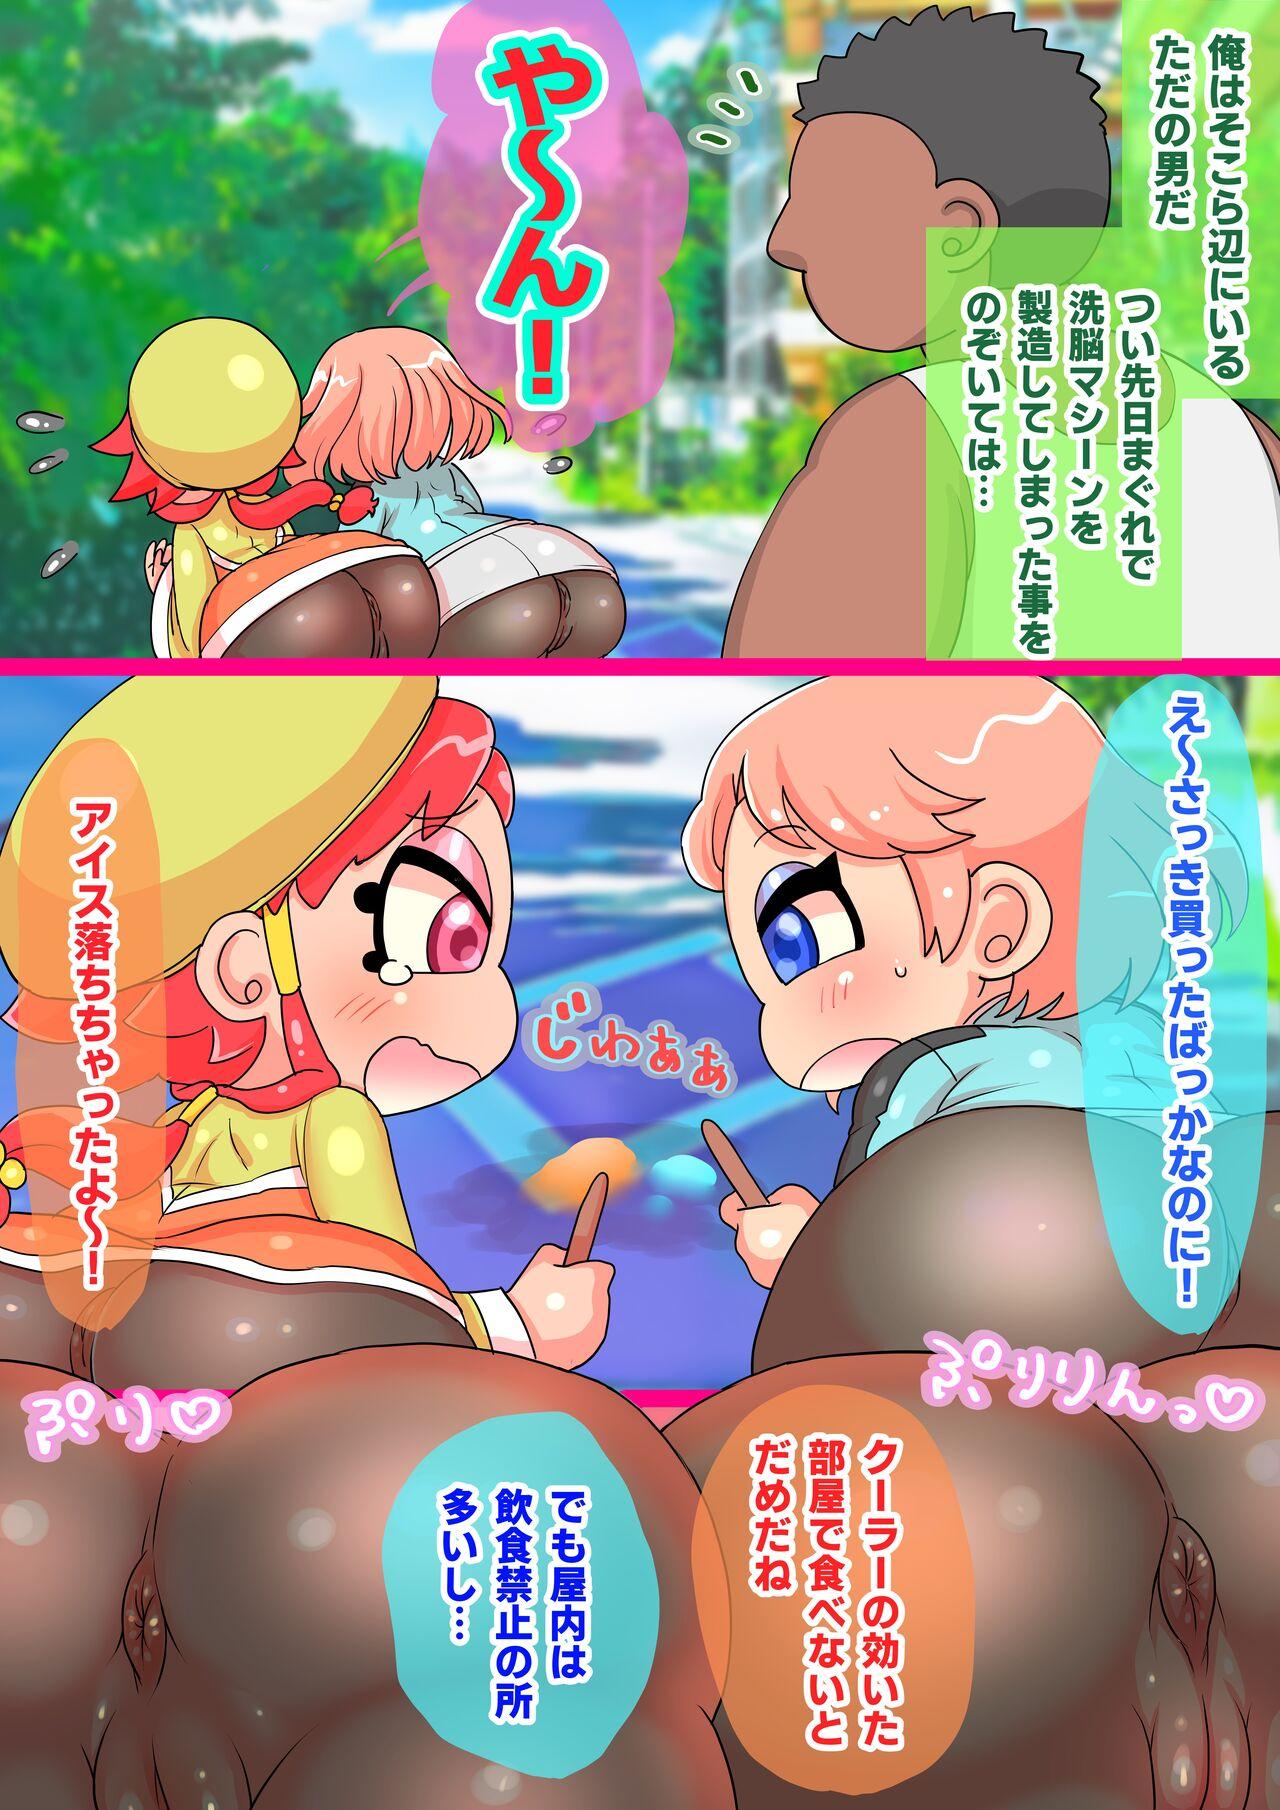 Gostoso 【Request】Emi-chan ＆ Shuka-chan - Cardfight vanguard Ngentot - Page 1